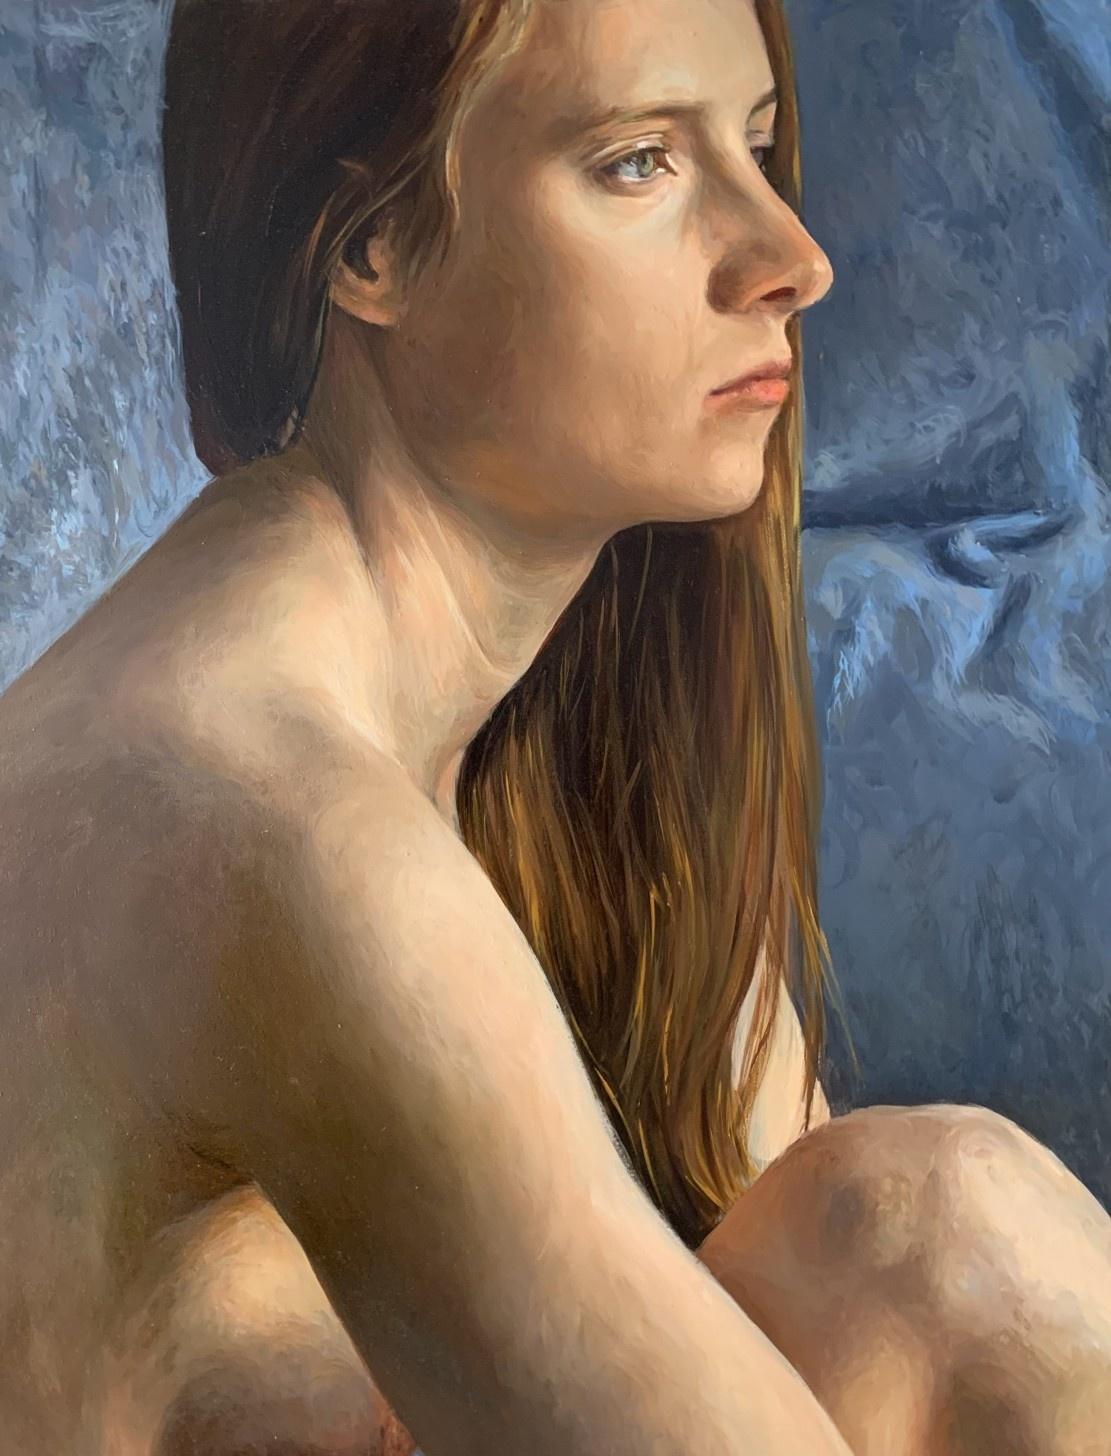 Giant nude - Realistic oil painting, Nude, Young Polish artist - Painting by Agnieszka Staak-Janczarska